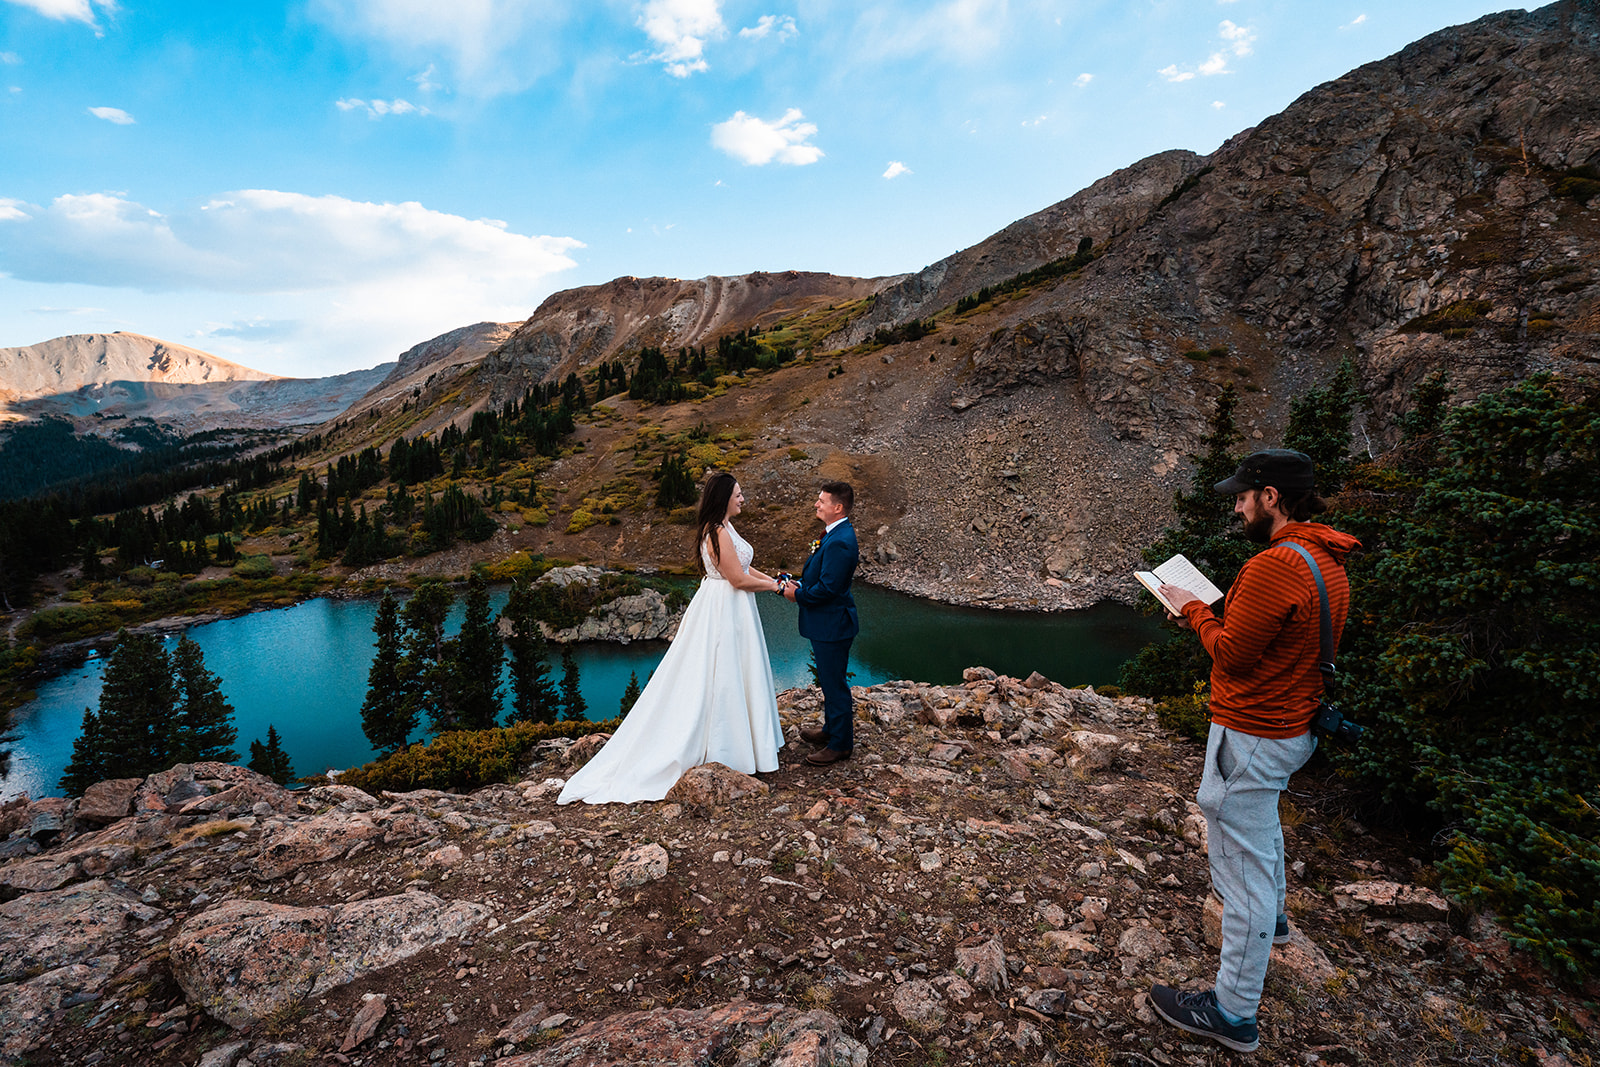 Bride and groom exchanging vows at alpine lake